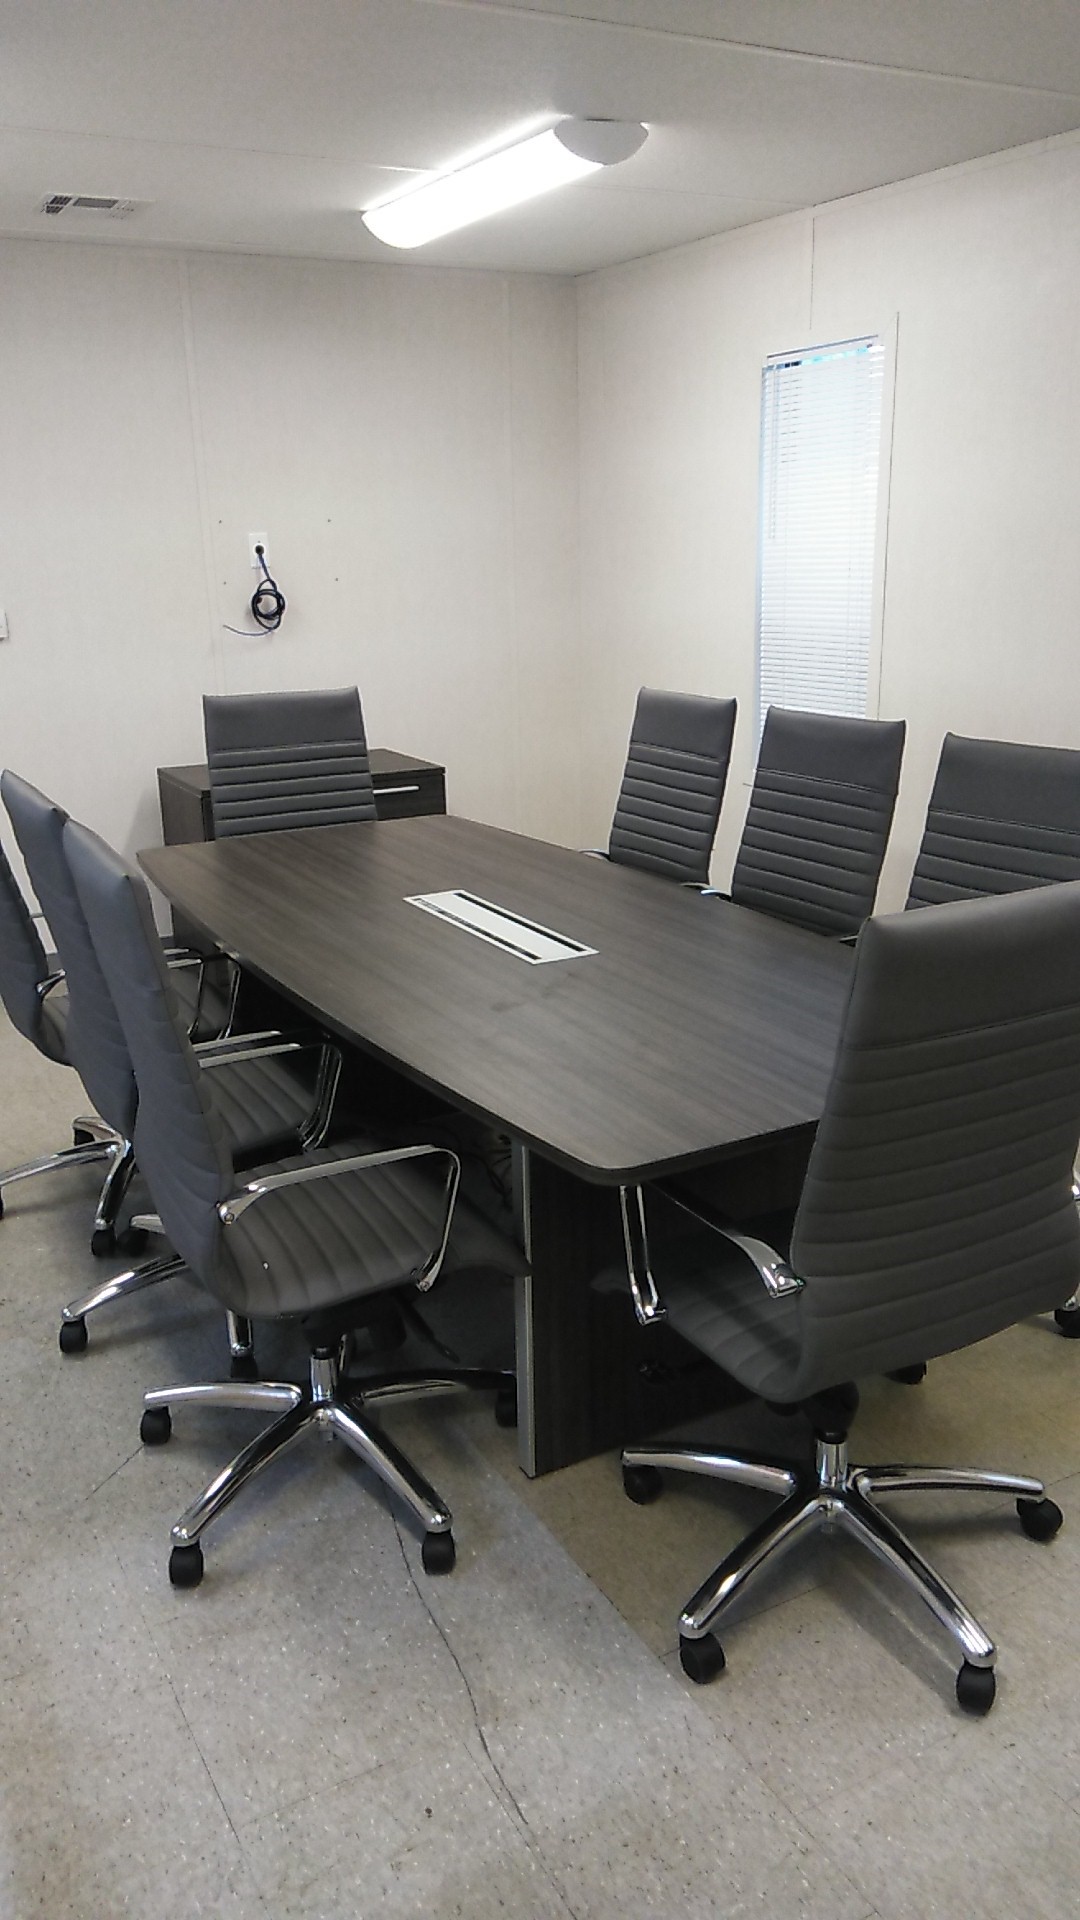 8' Boat conference table gray